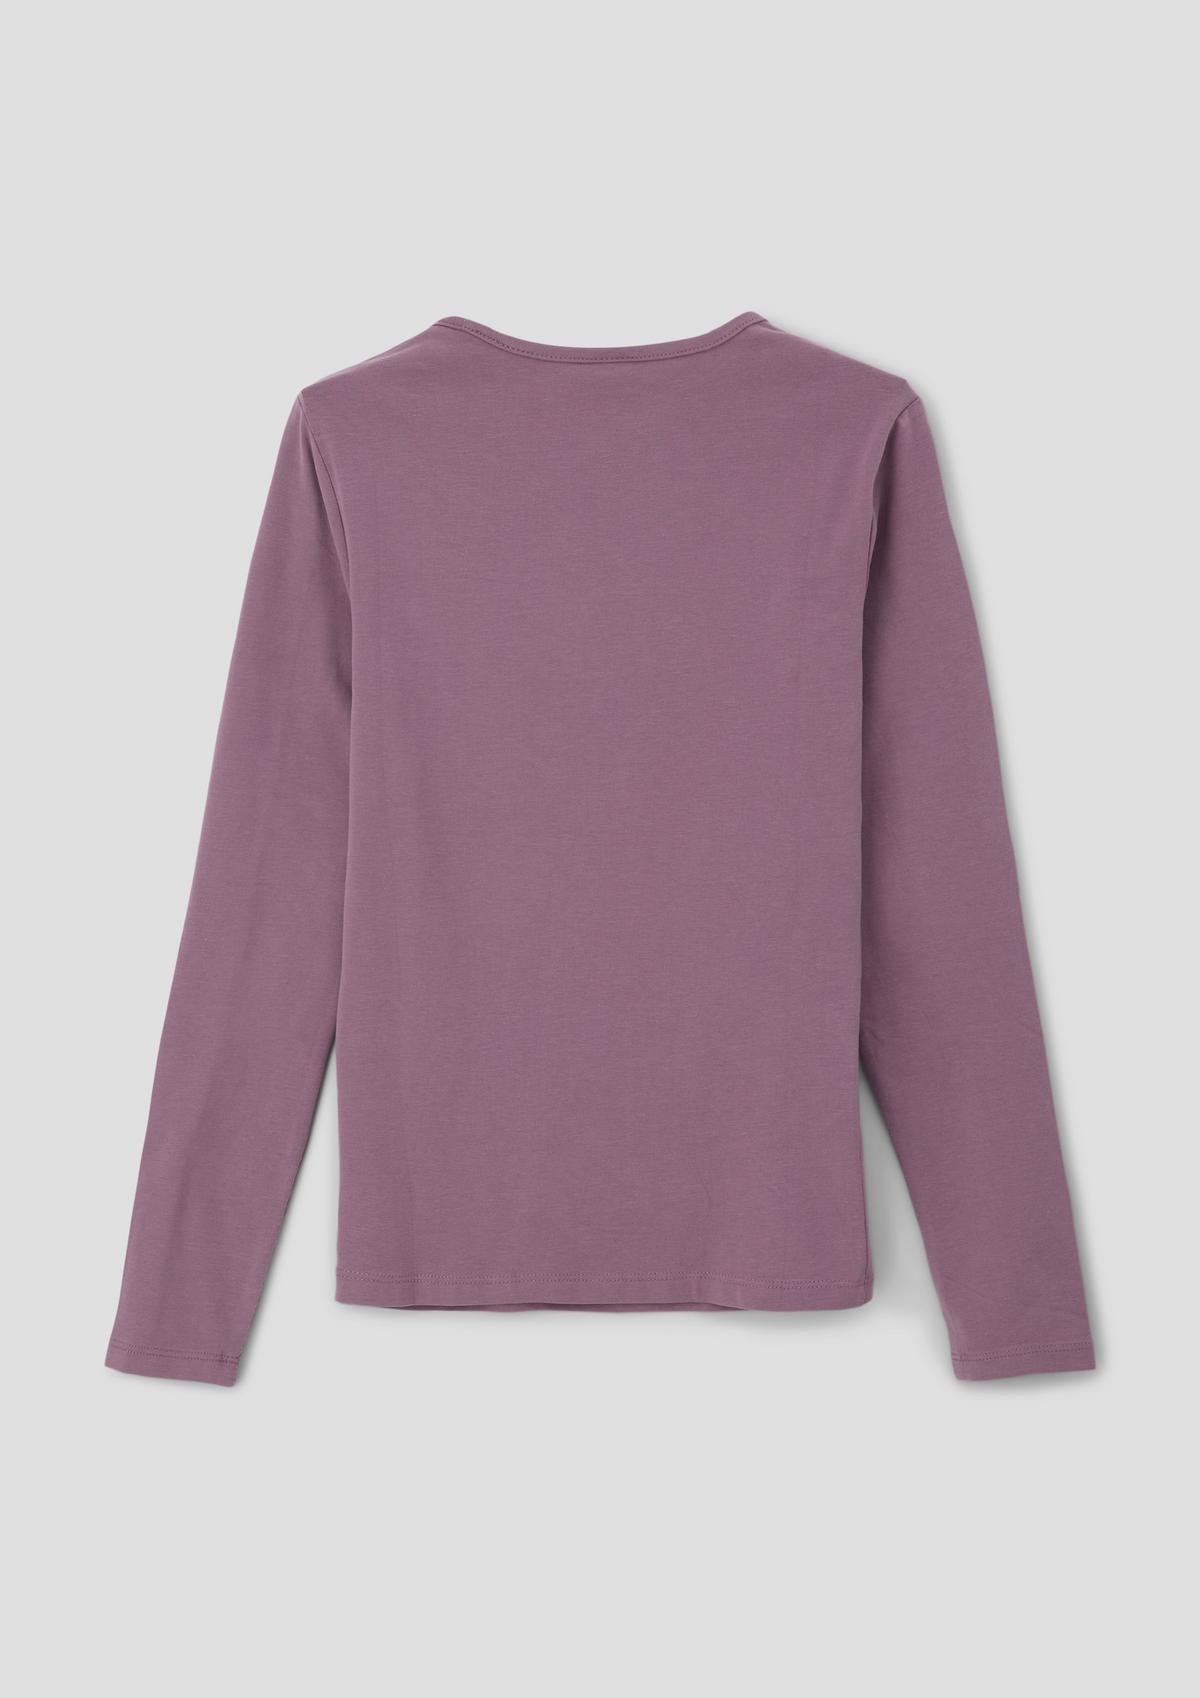 s.Oliver Long sleeve top with an asymmetric neckline